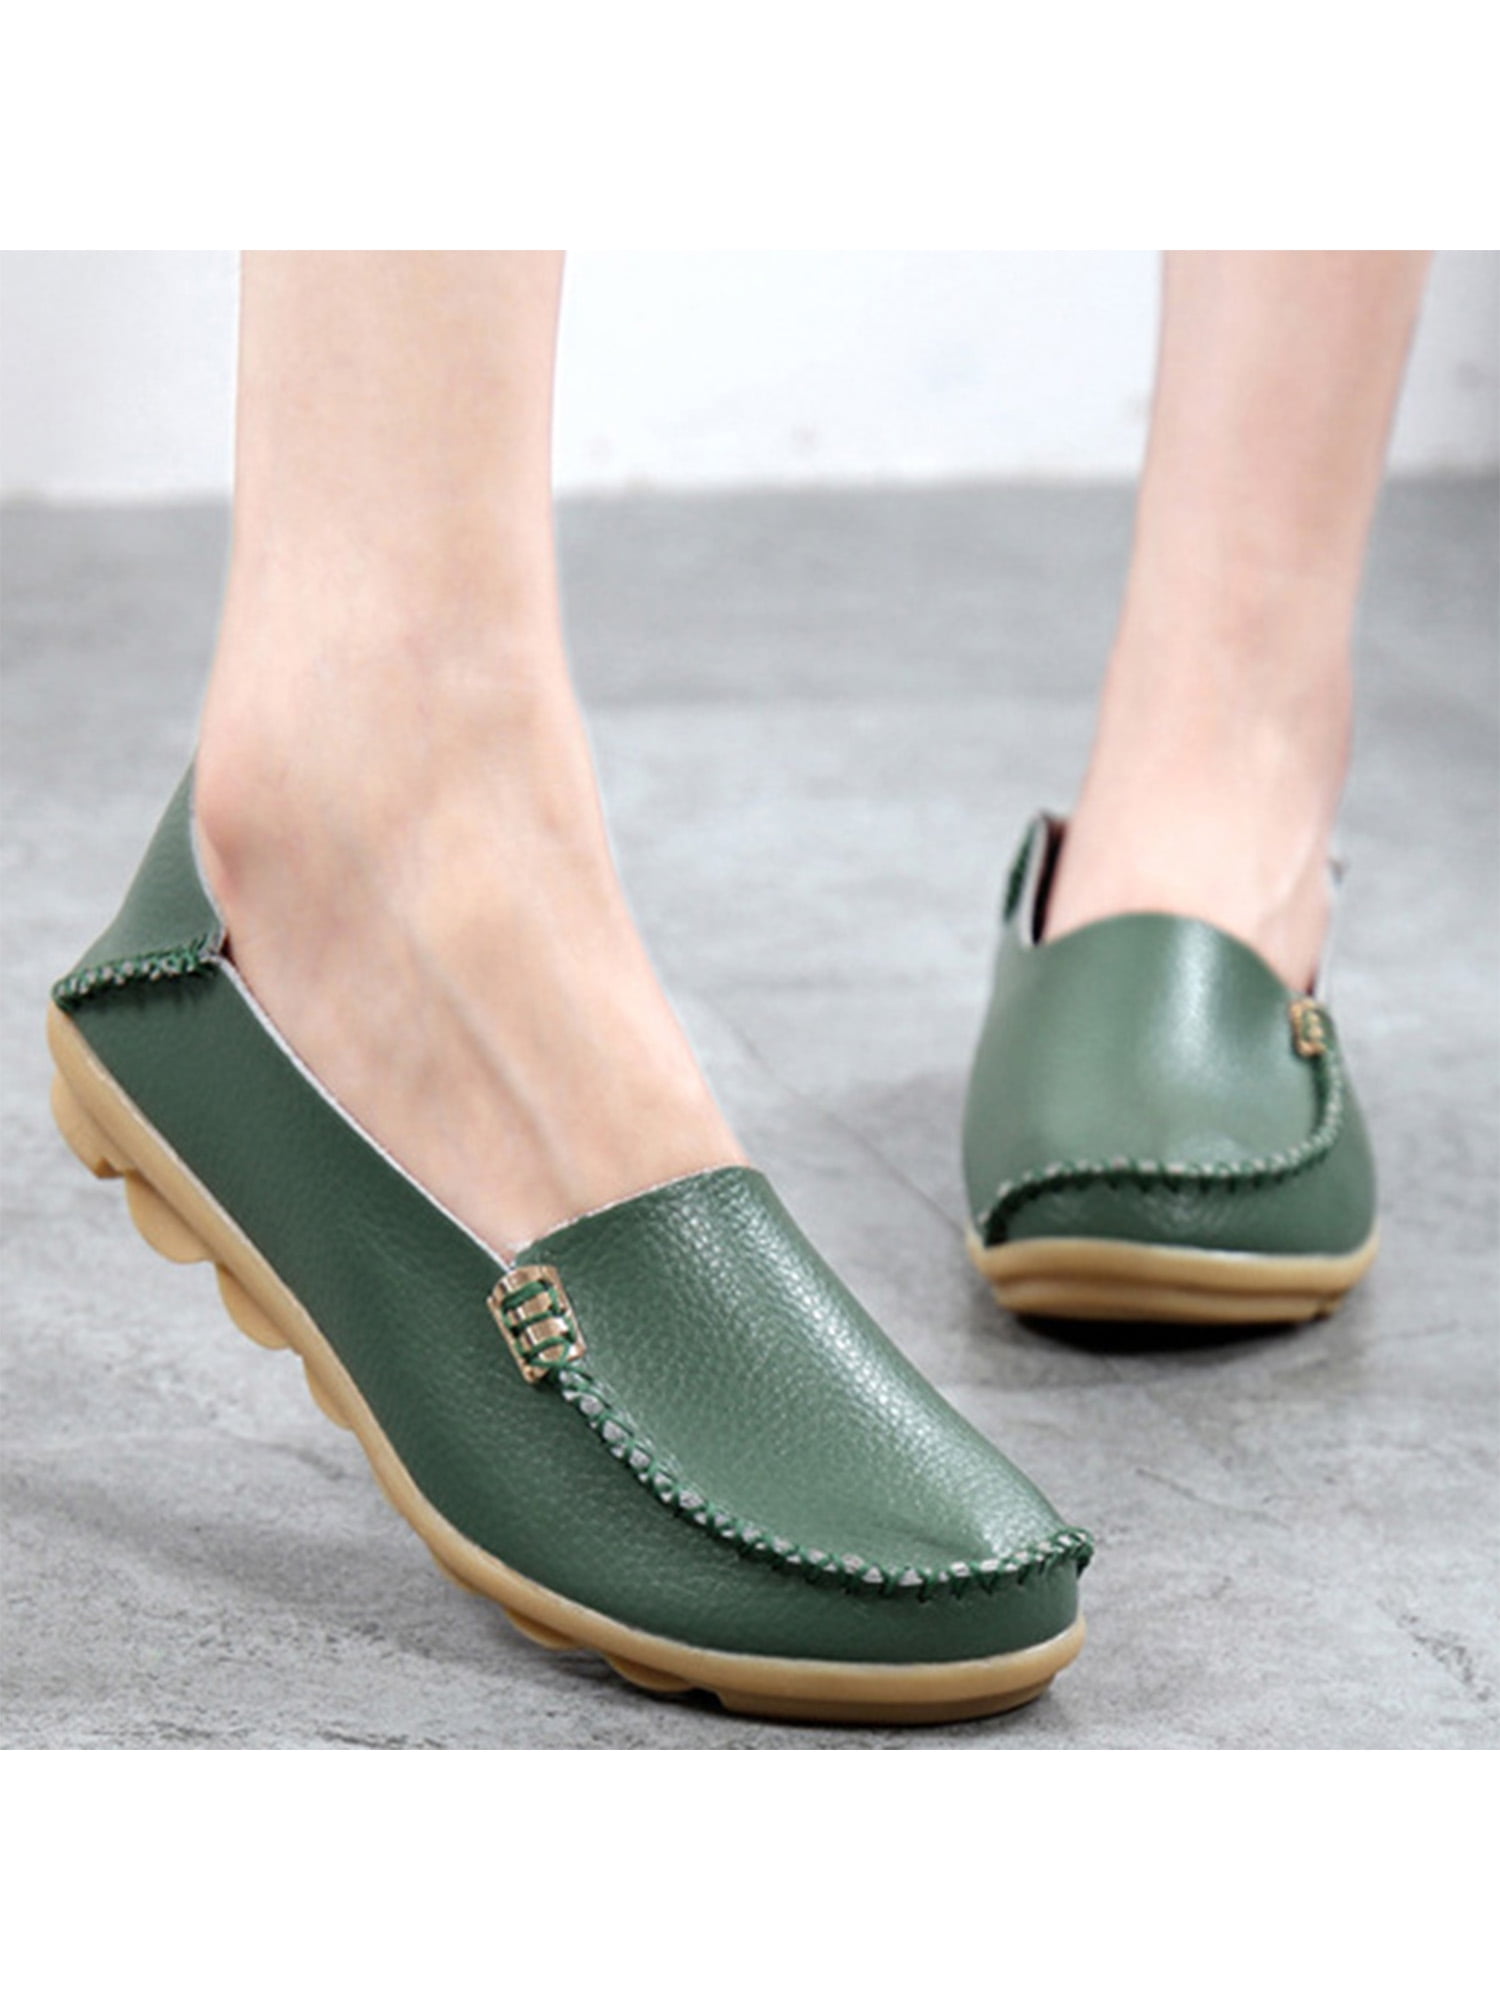 Women Cozy Loafers Soft Premium PU Leather Upper Thick Rubber Sole Simple Design Lightweight Working Driving Flat Penny Shoes 